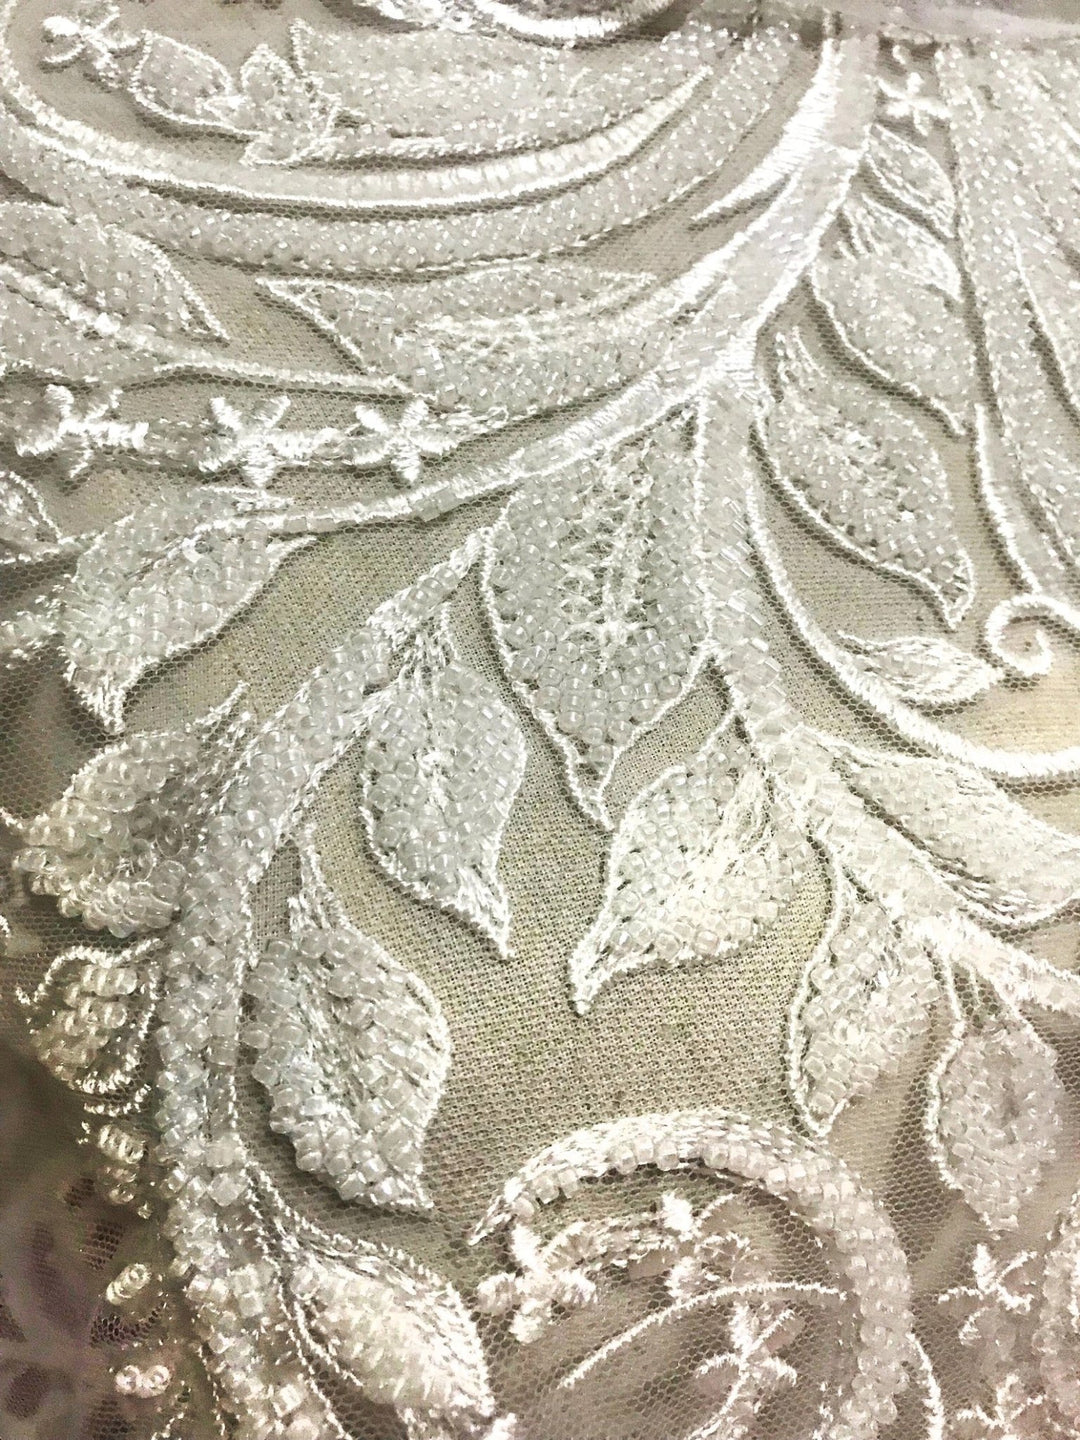 5 YARDS / Palladino Beaded Sequin Embroidery Mesh Tulle Lace / Wedding Dress Fabric - Classic & Modern